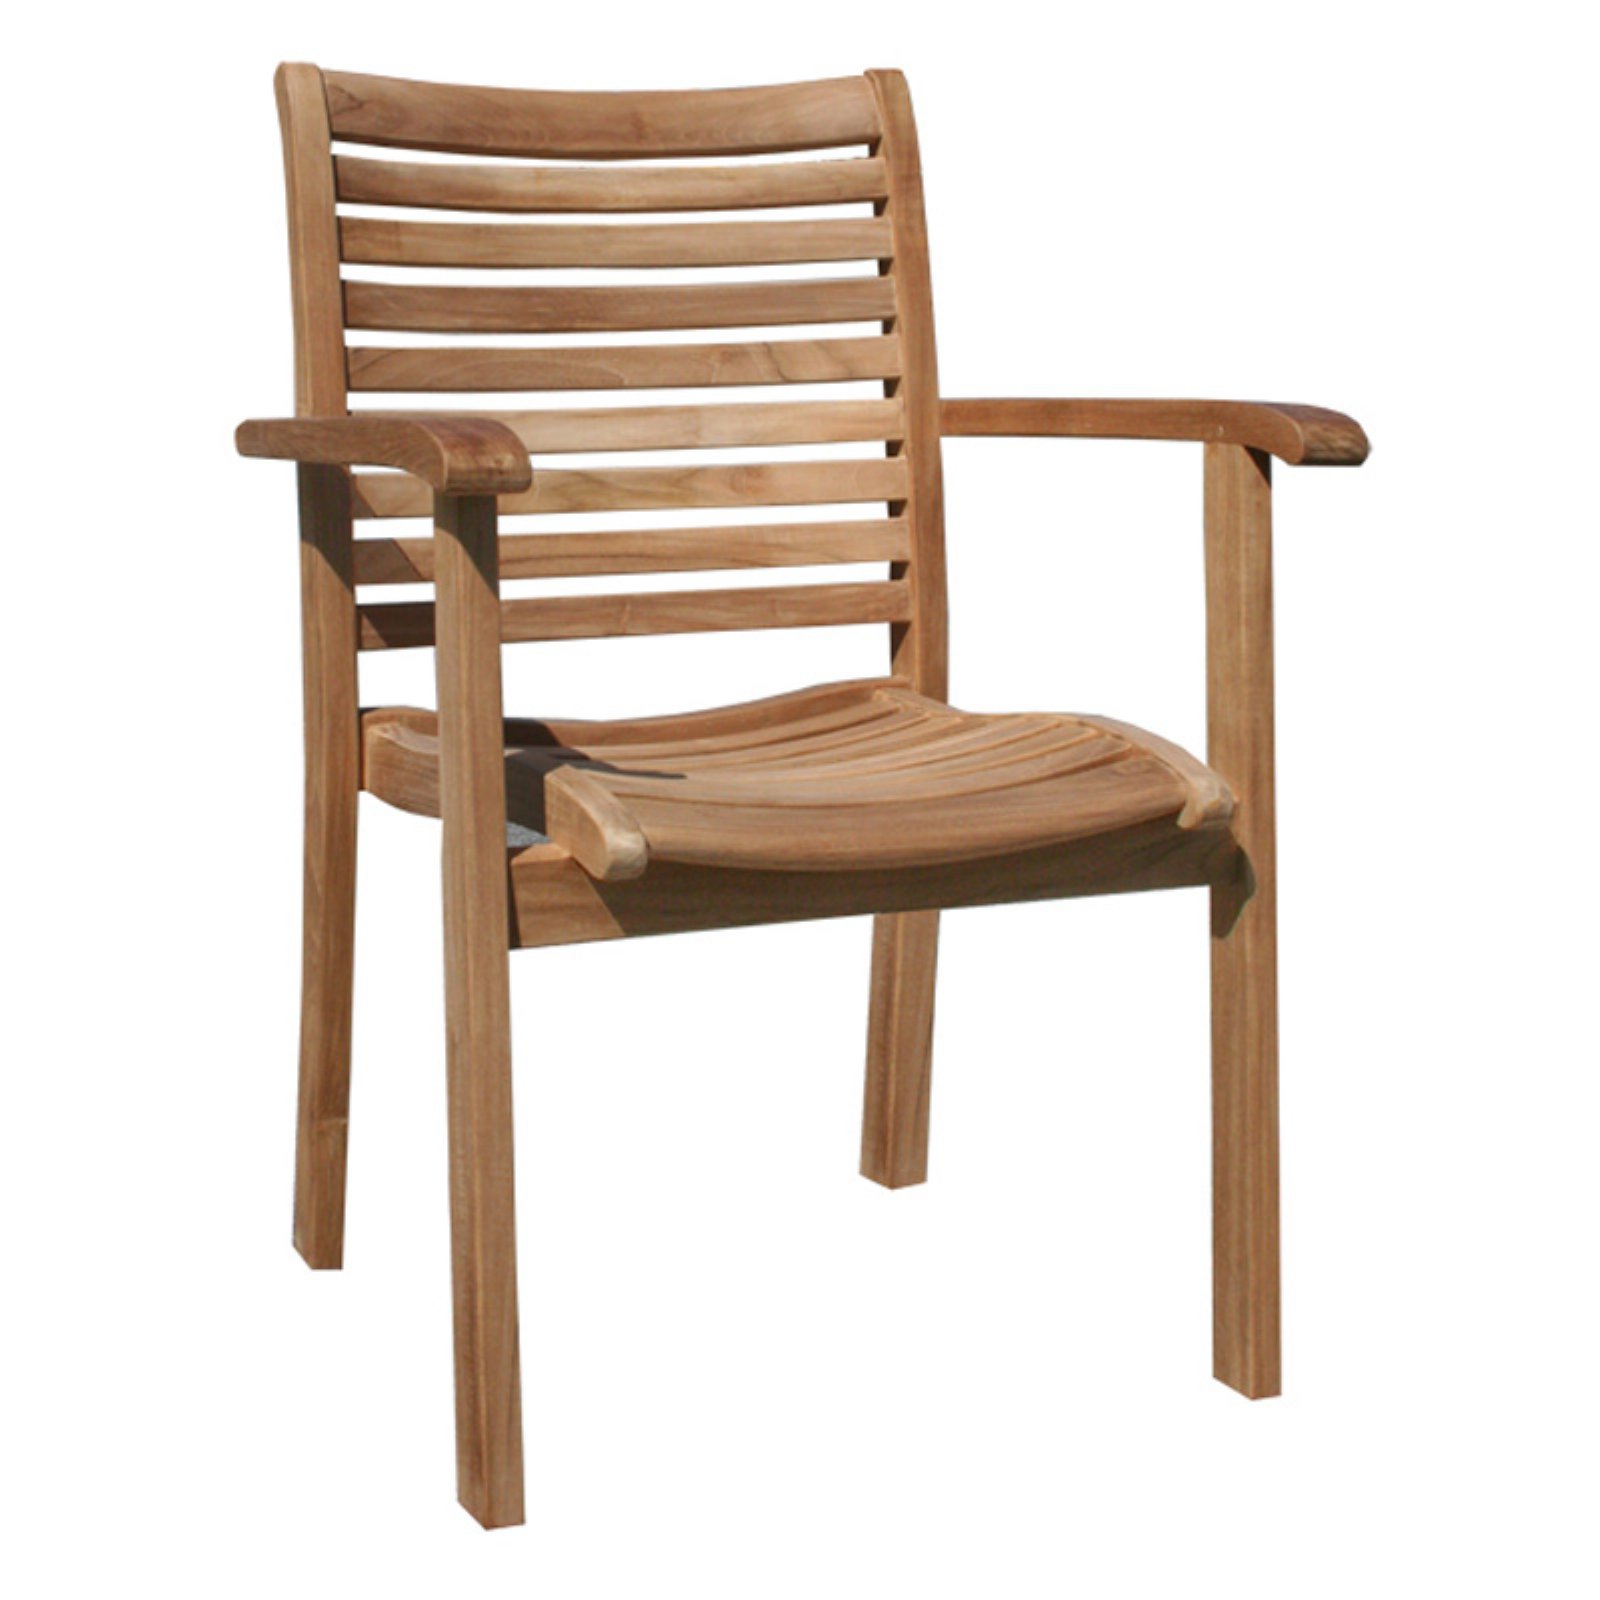 Chic Teak Italy Teak Stacking Patio Dining Chair - image 1 of 7